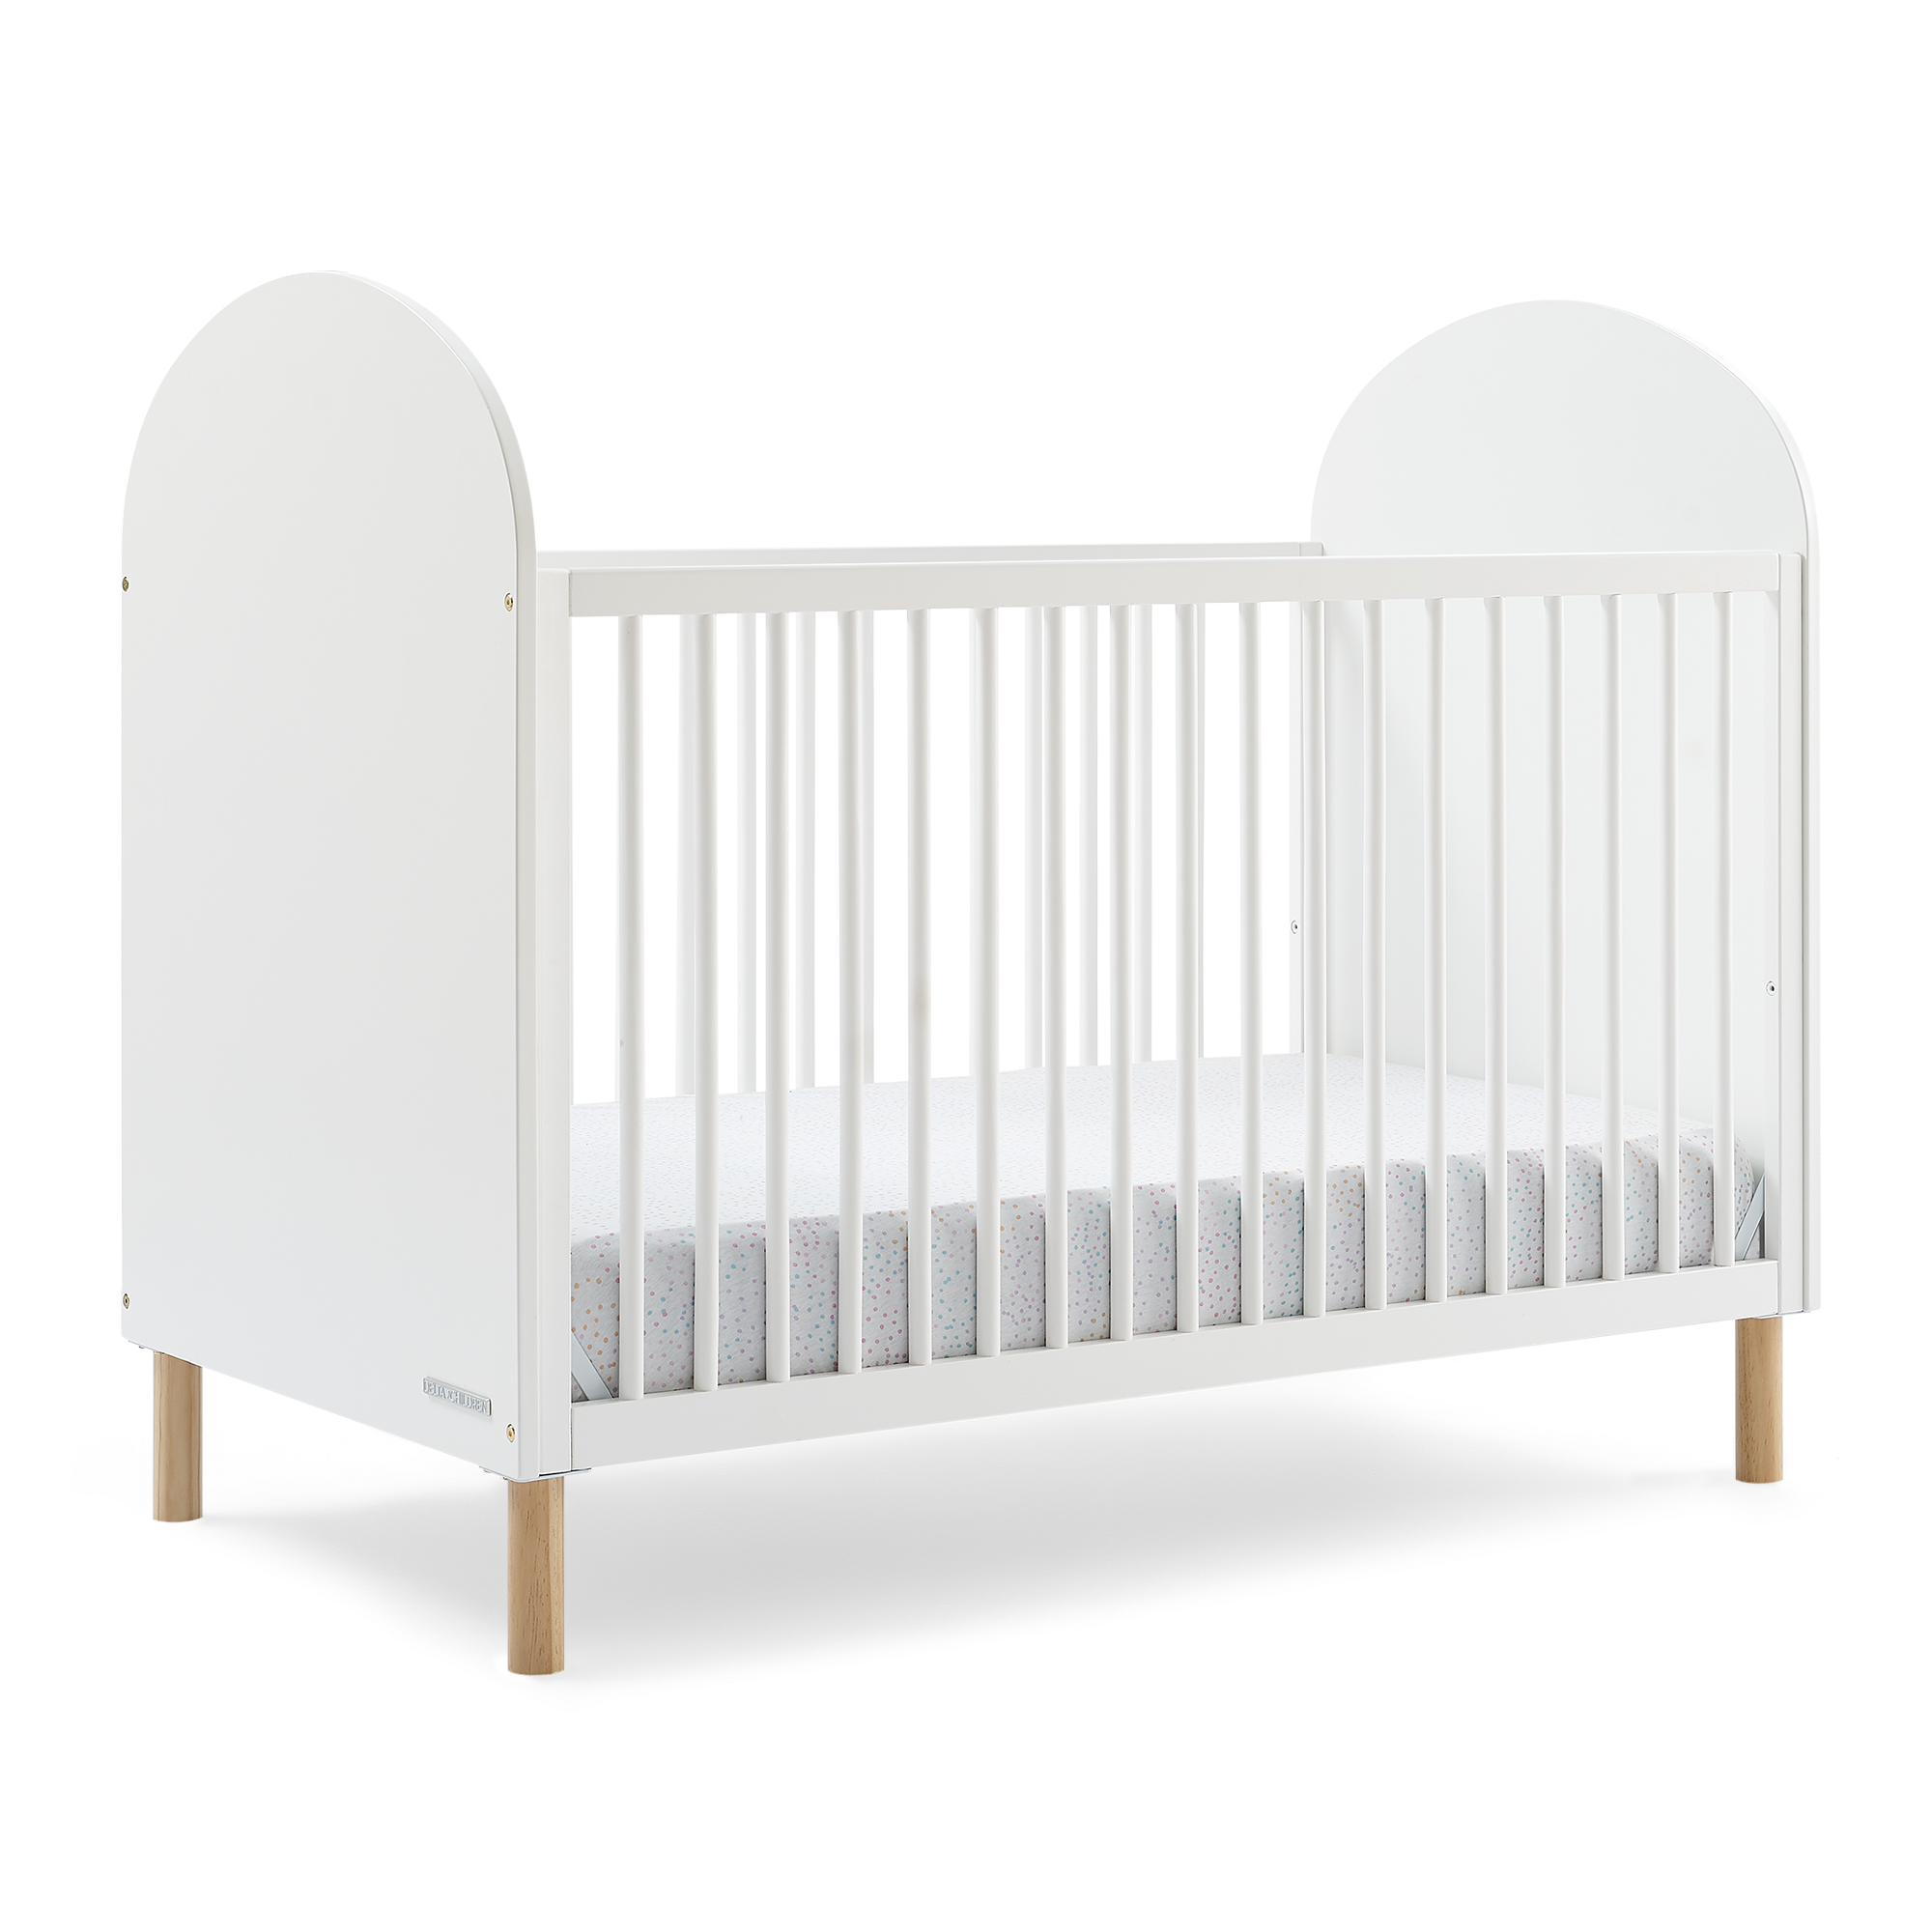 Delta Children Reese 4-in-1 Convertible Crib - Greenguard Gold Certified, Bianca White/Natural - image 1 of 19